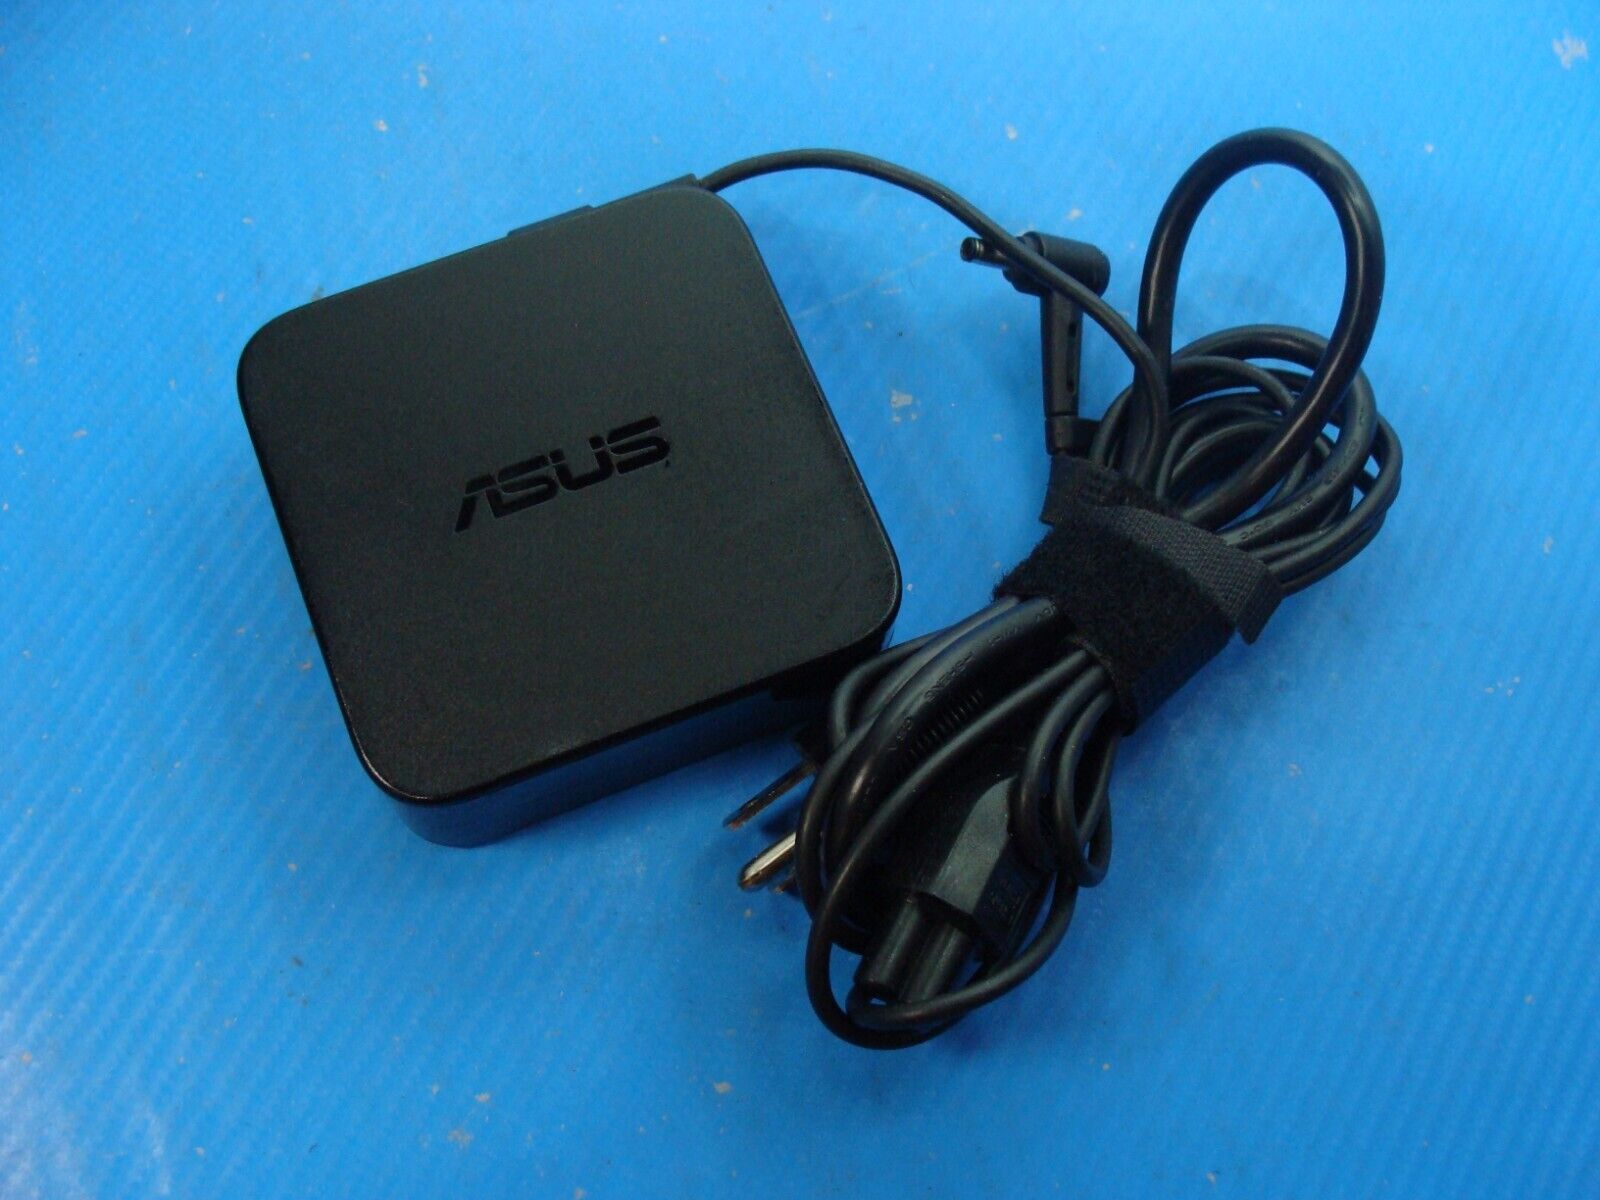 Genuine ASUS Laptop Charger AC Power Adapter ADP-90YD B 90W 4.5mm Tip Center Pin